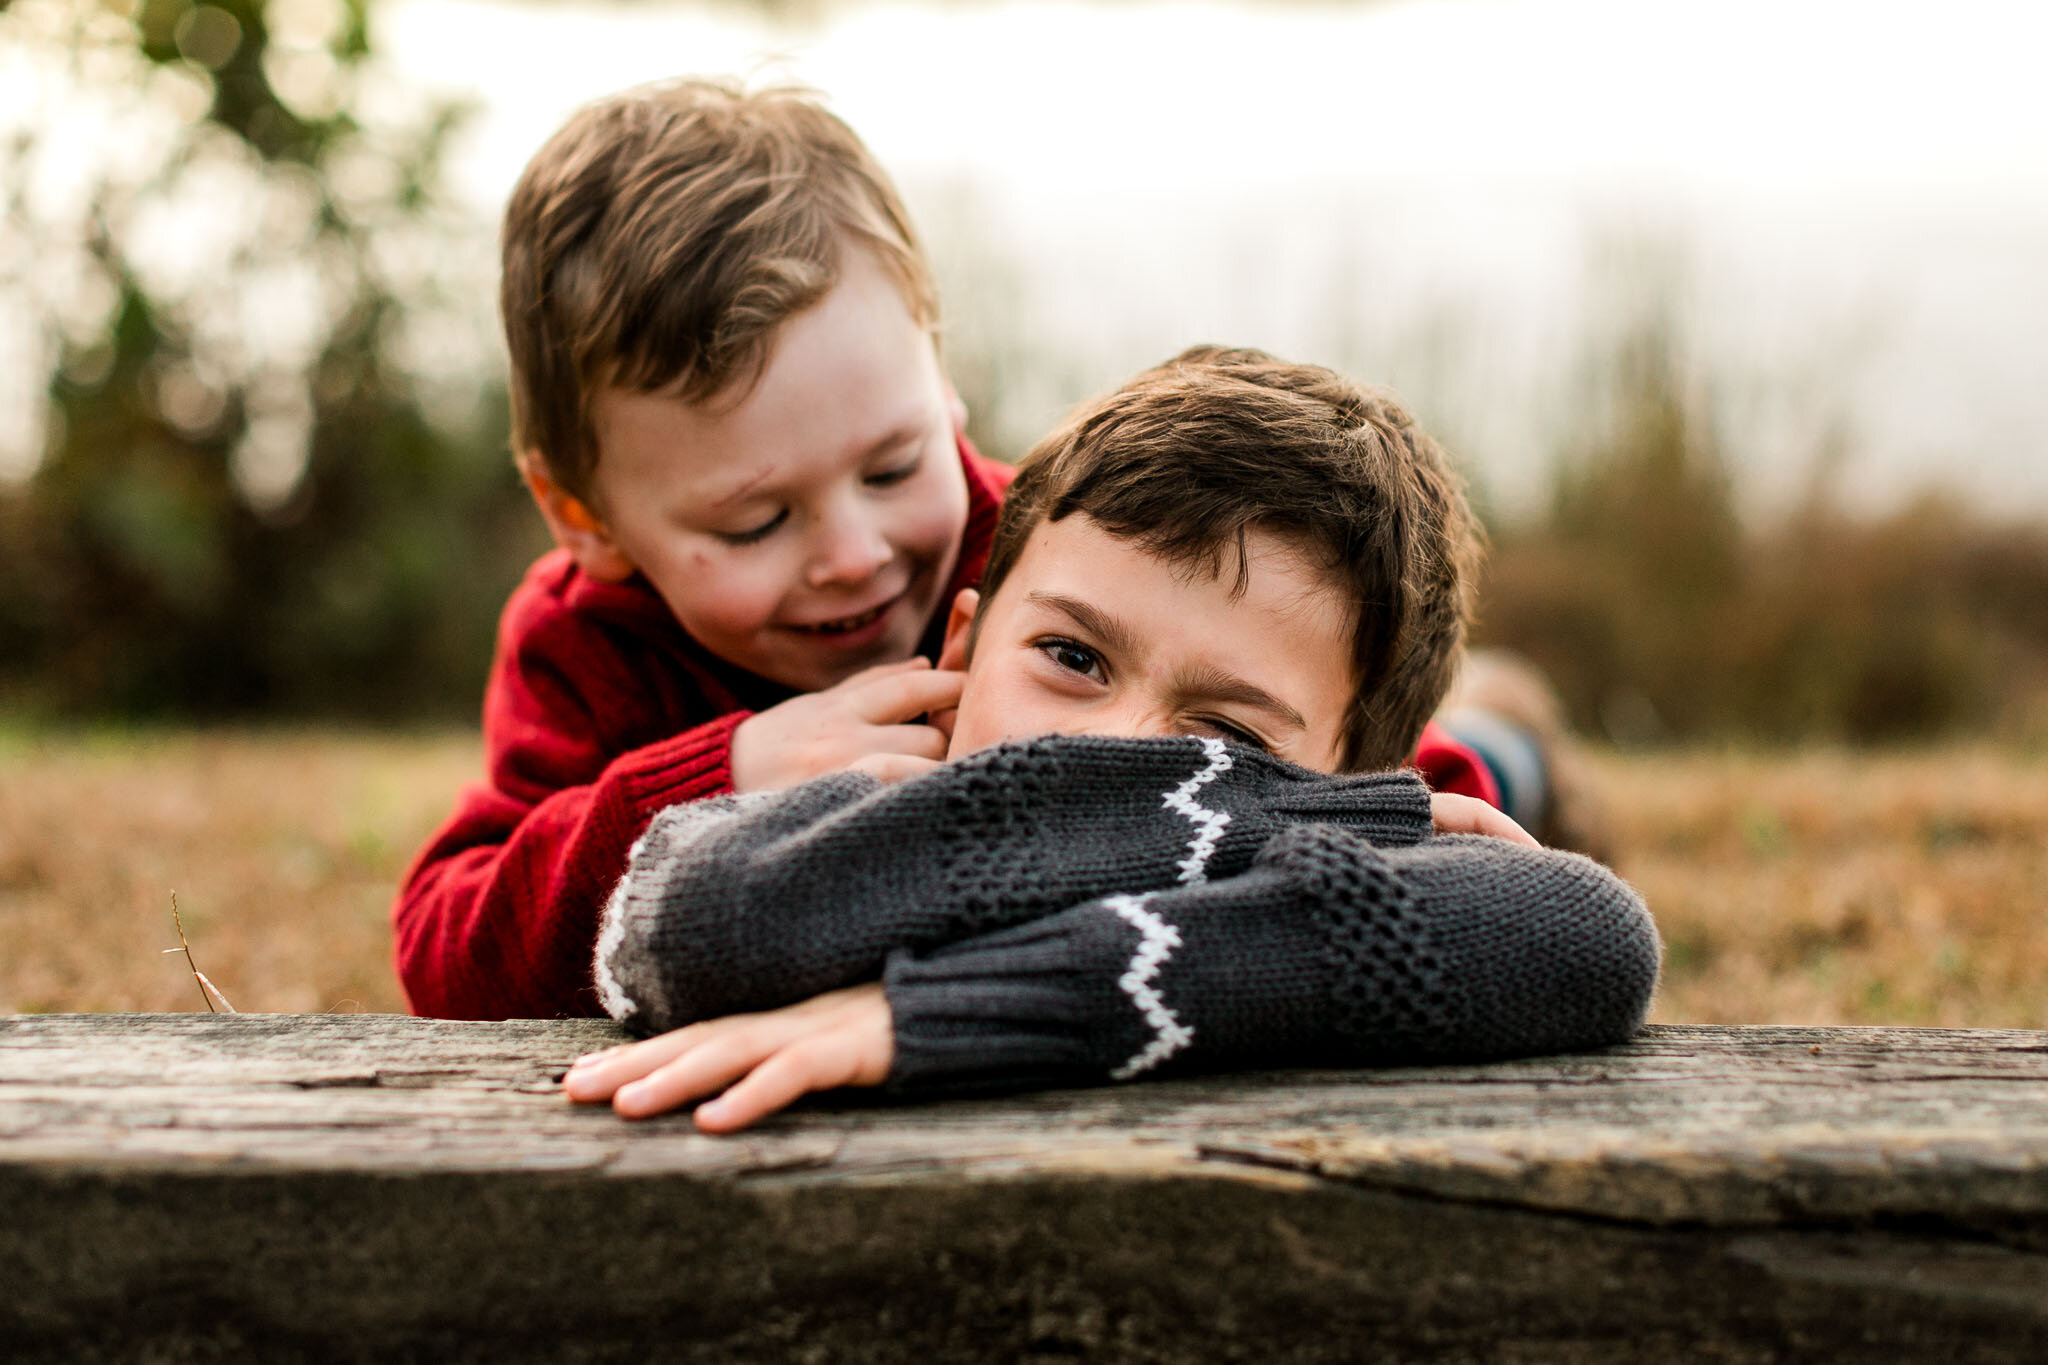 Raleigh Family Photographer | By G. Lin Photography | Silly candid photo of boys on the grass